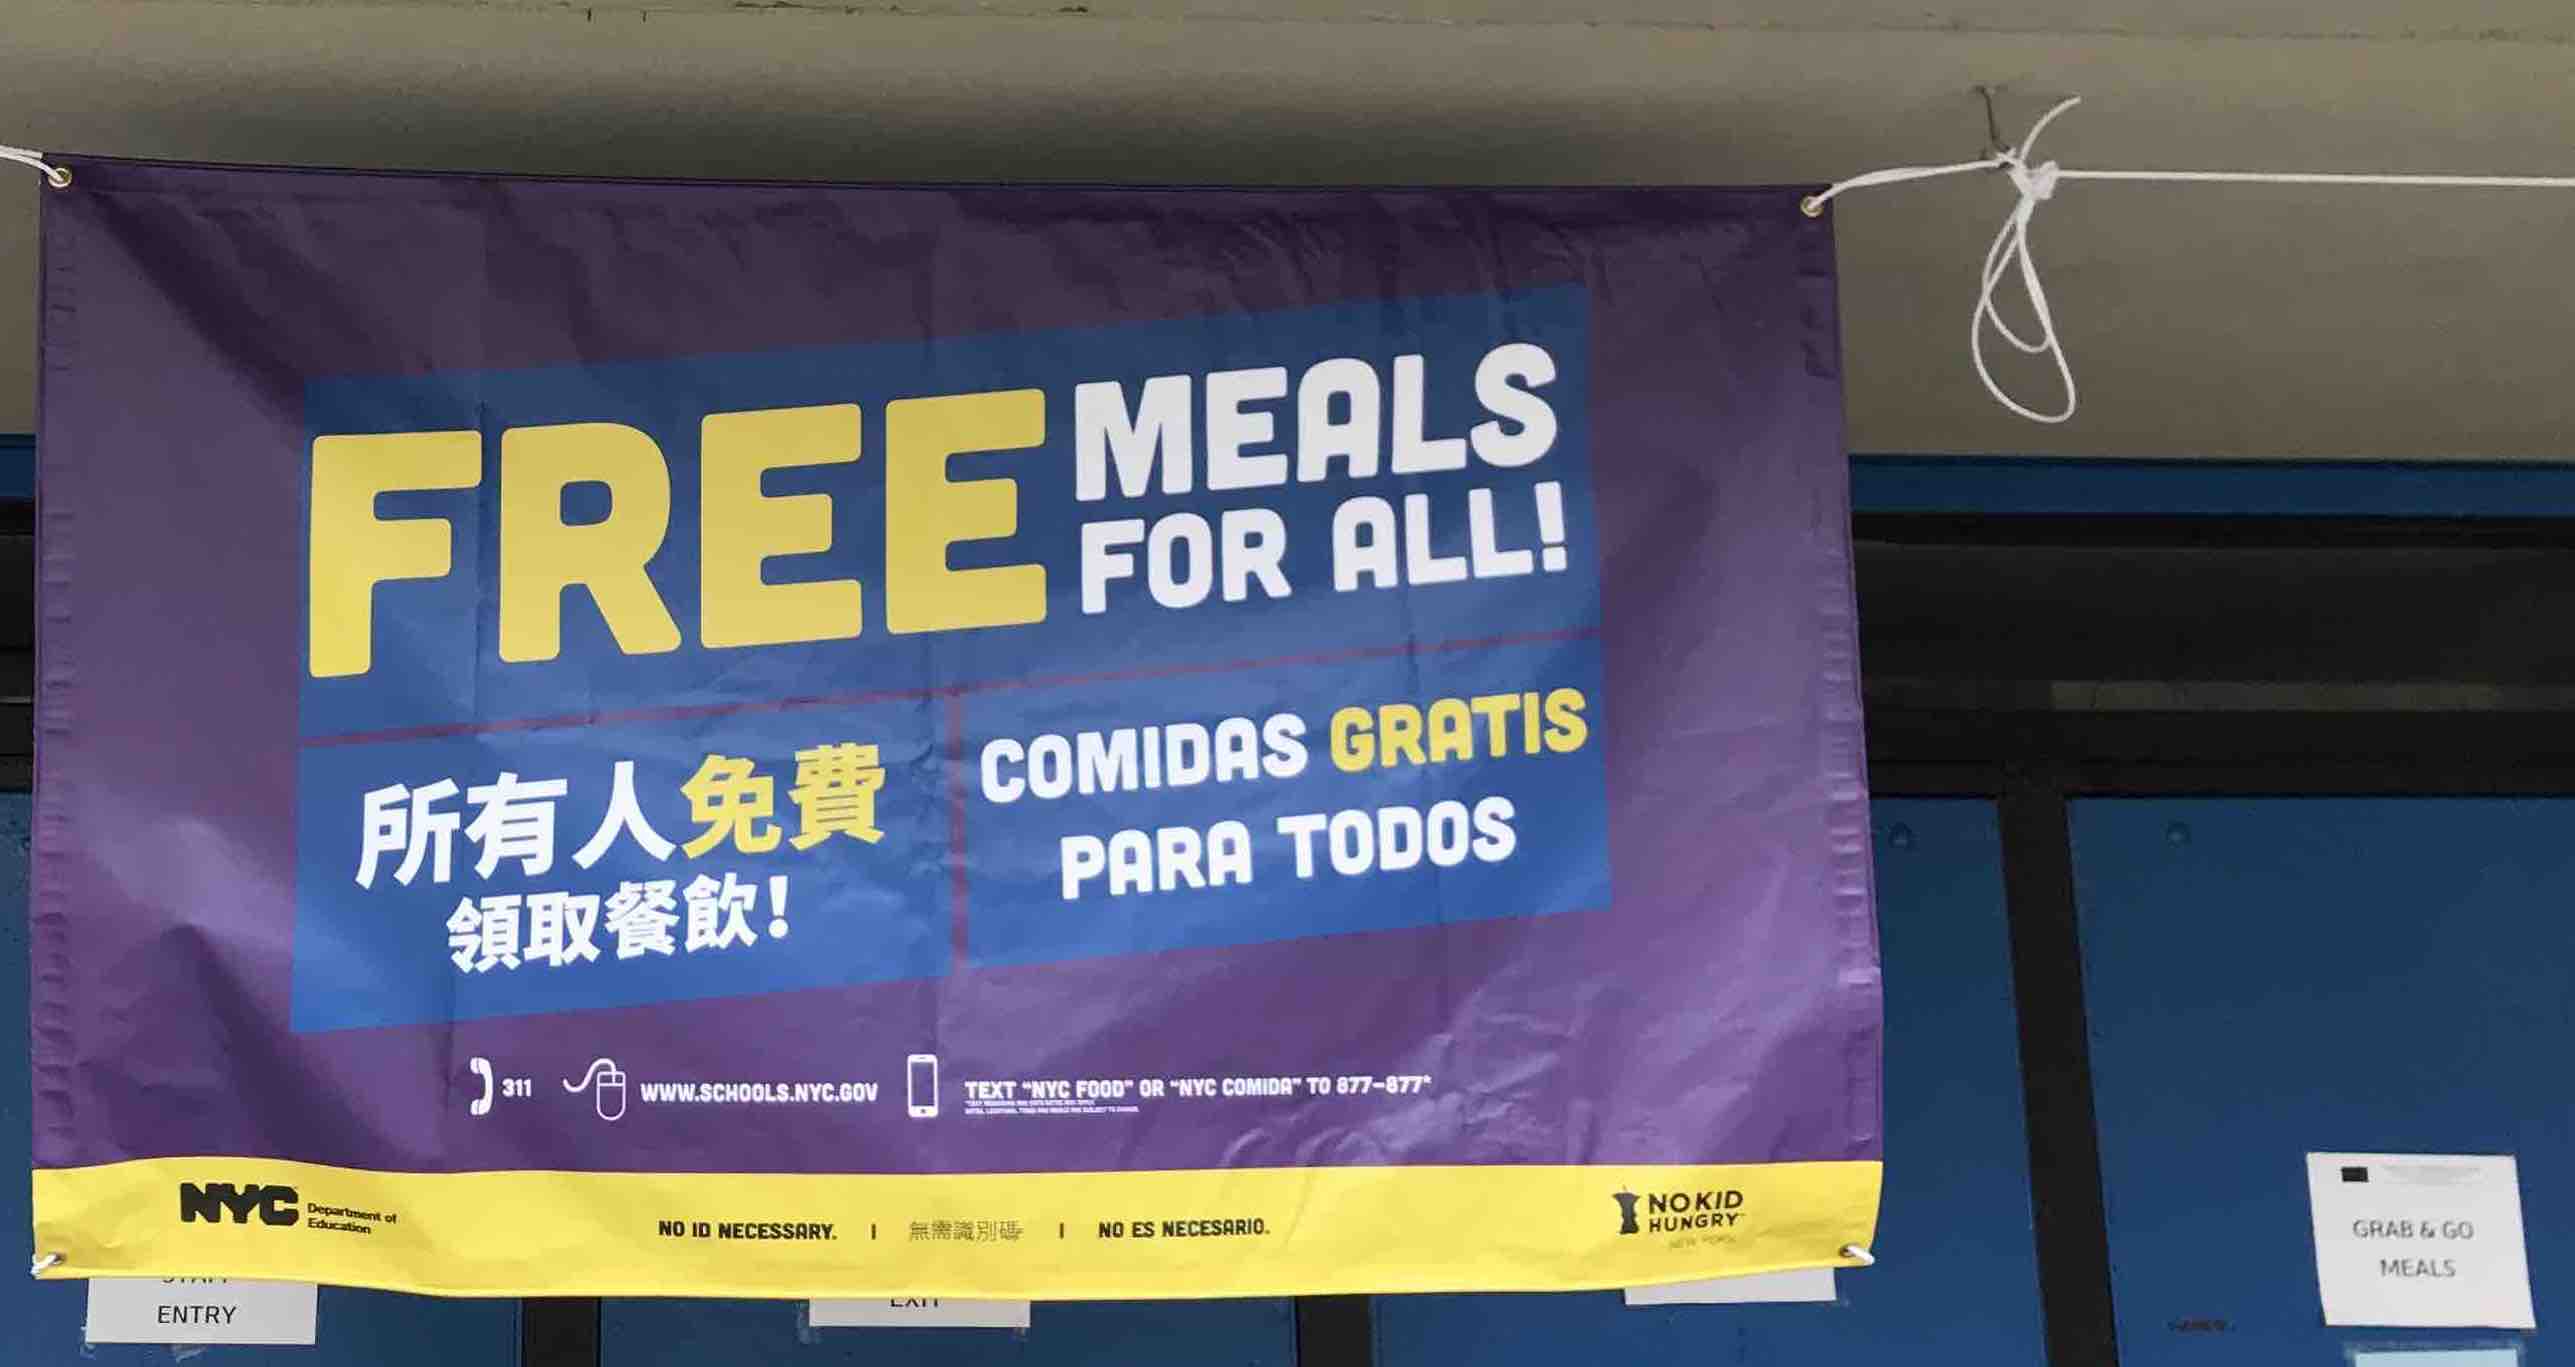 banner at a site announcing free meals for all in English, Chinese, and Spanish